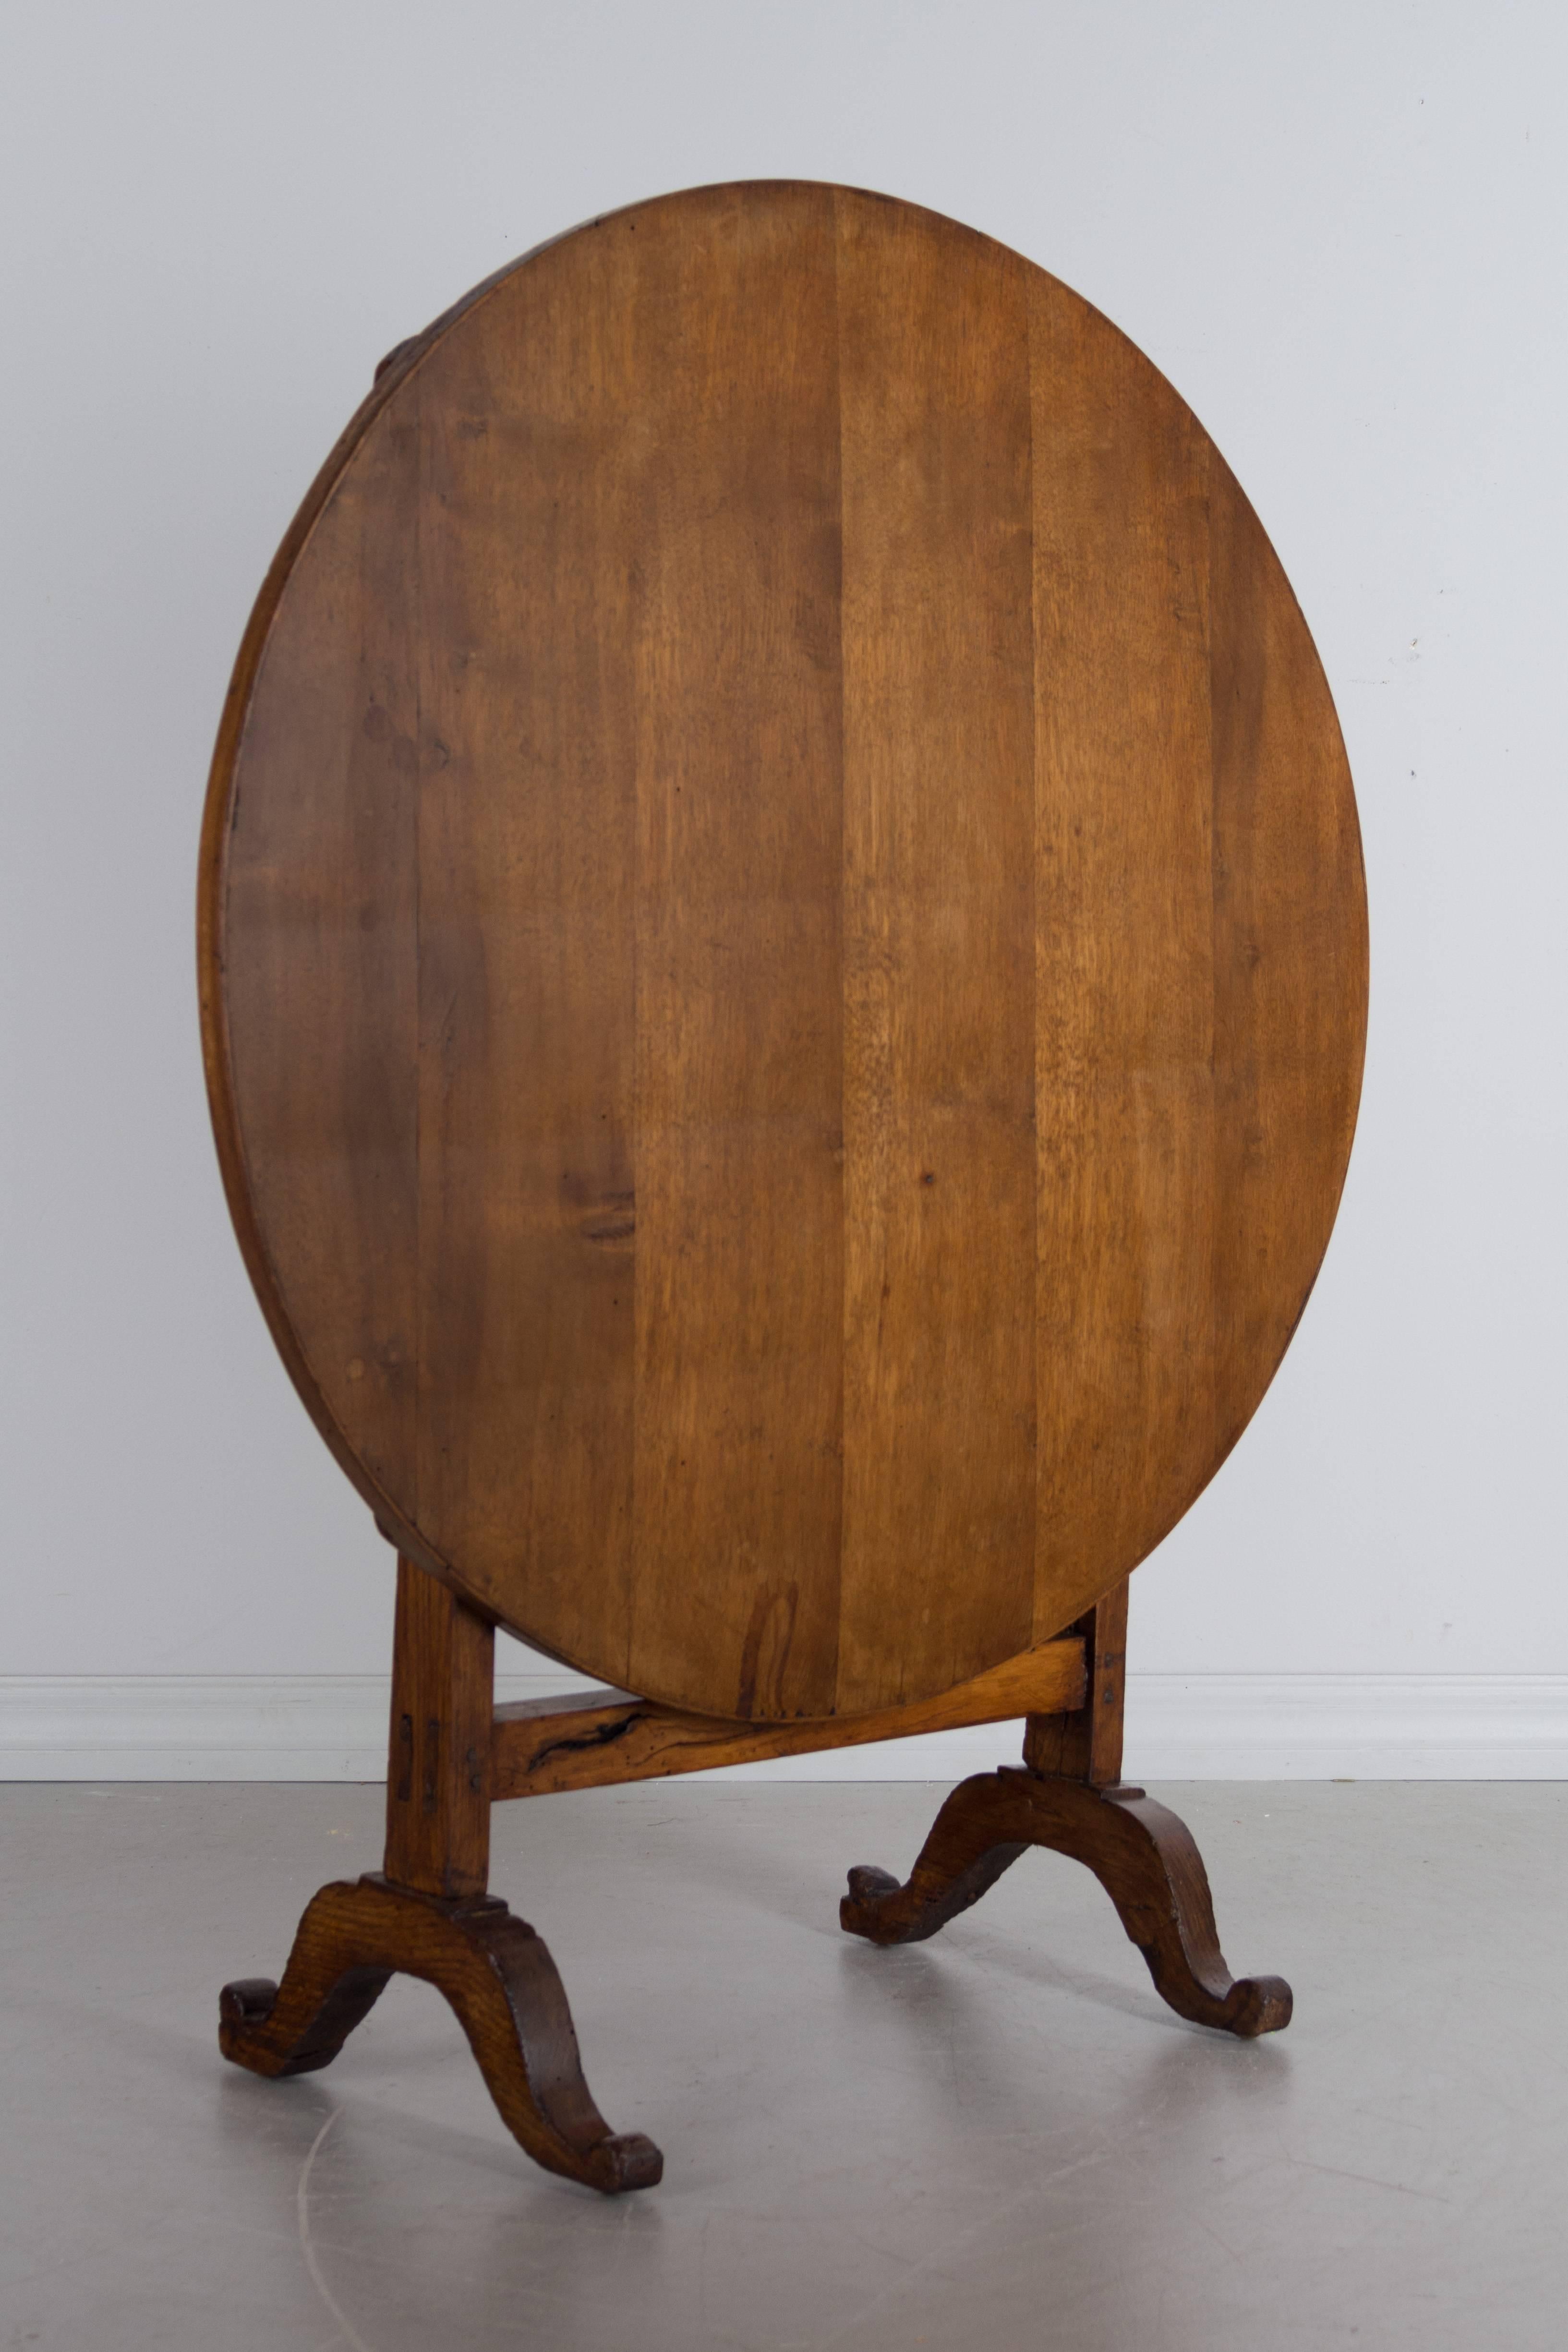 A 19th century French tilt-top wine tasting table made of solid oak. Waxed patina. The top has been restored with new planks added at a later date. Height when tilted is 43".
More photos available upon request. We have a large selection of